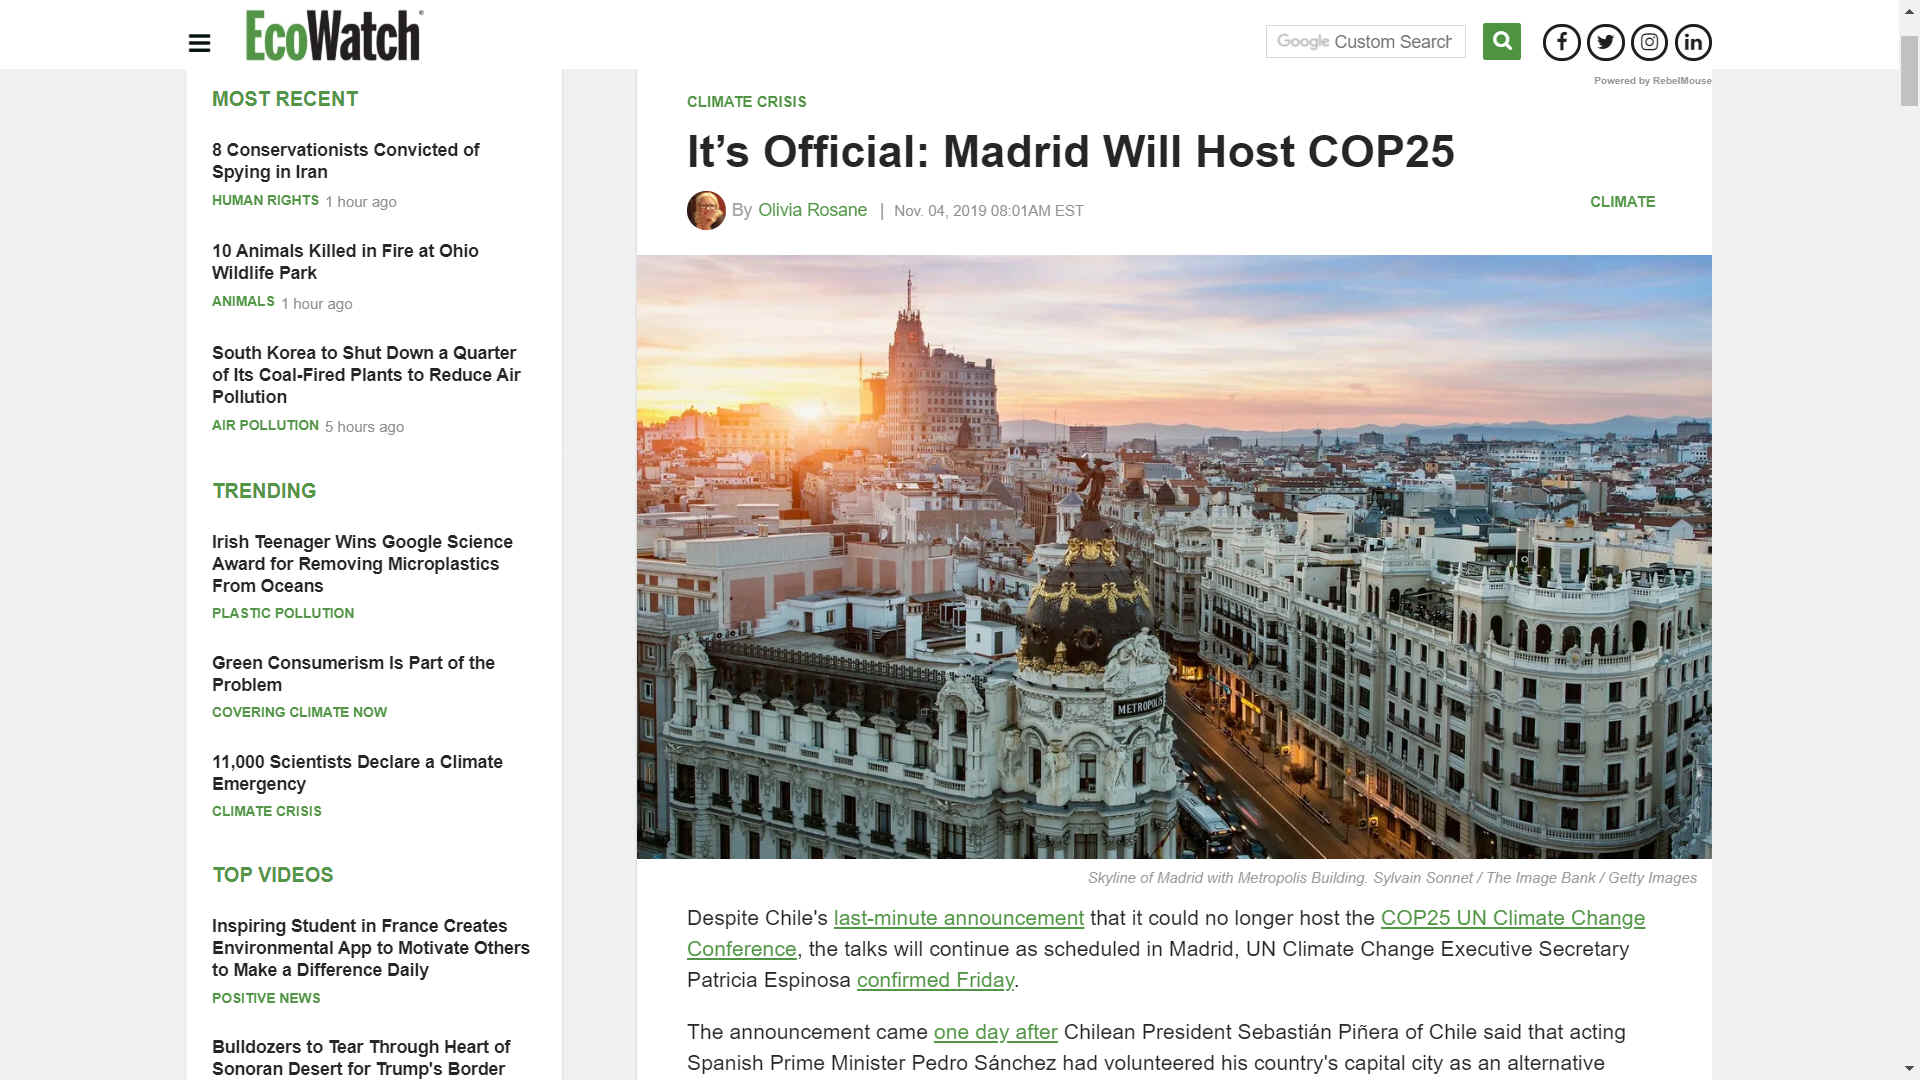 Madrid to host climate change talks COP 25 in December 2019